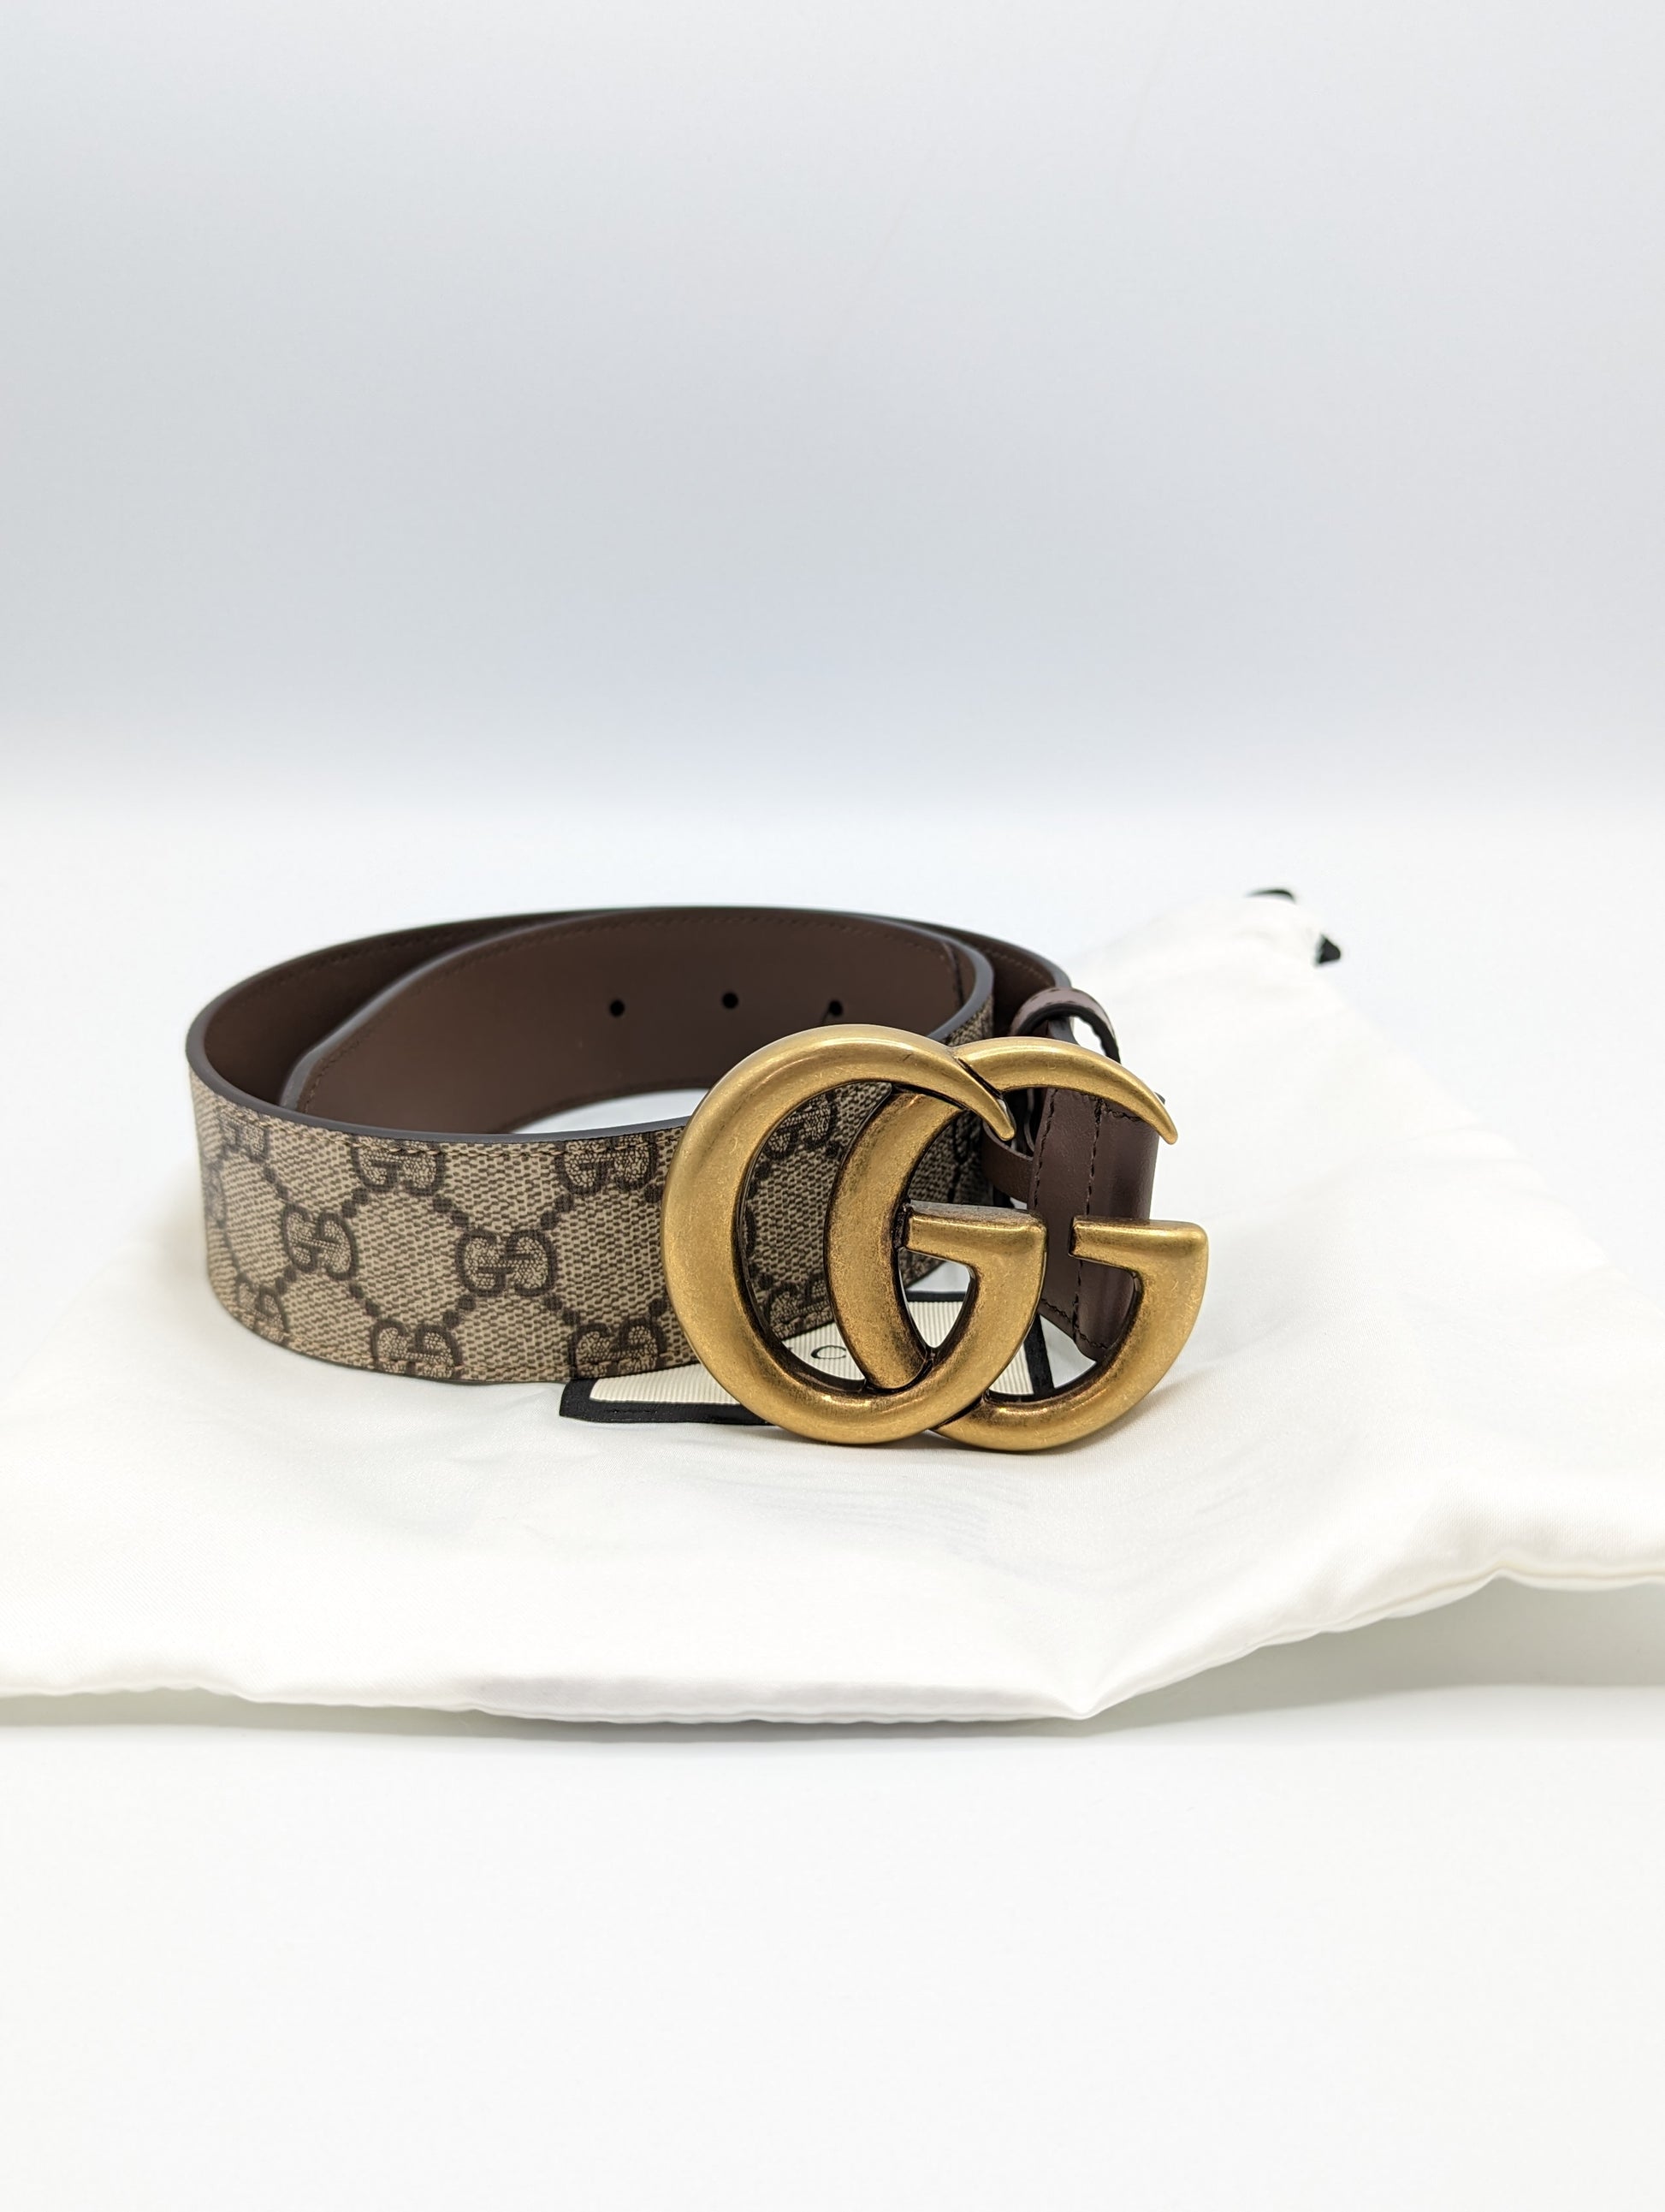 NWT Gucci Marmont Supreme Belt Size 65 – For The Love of Luxury